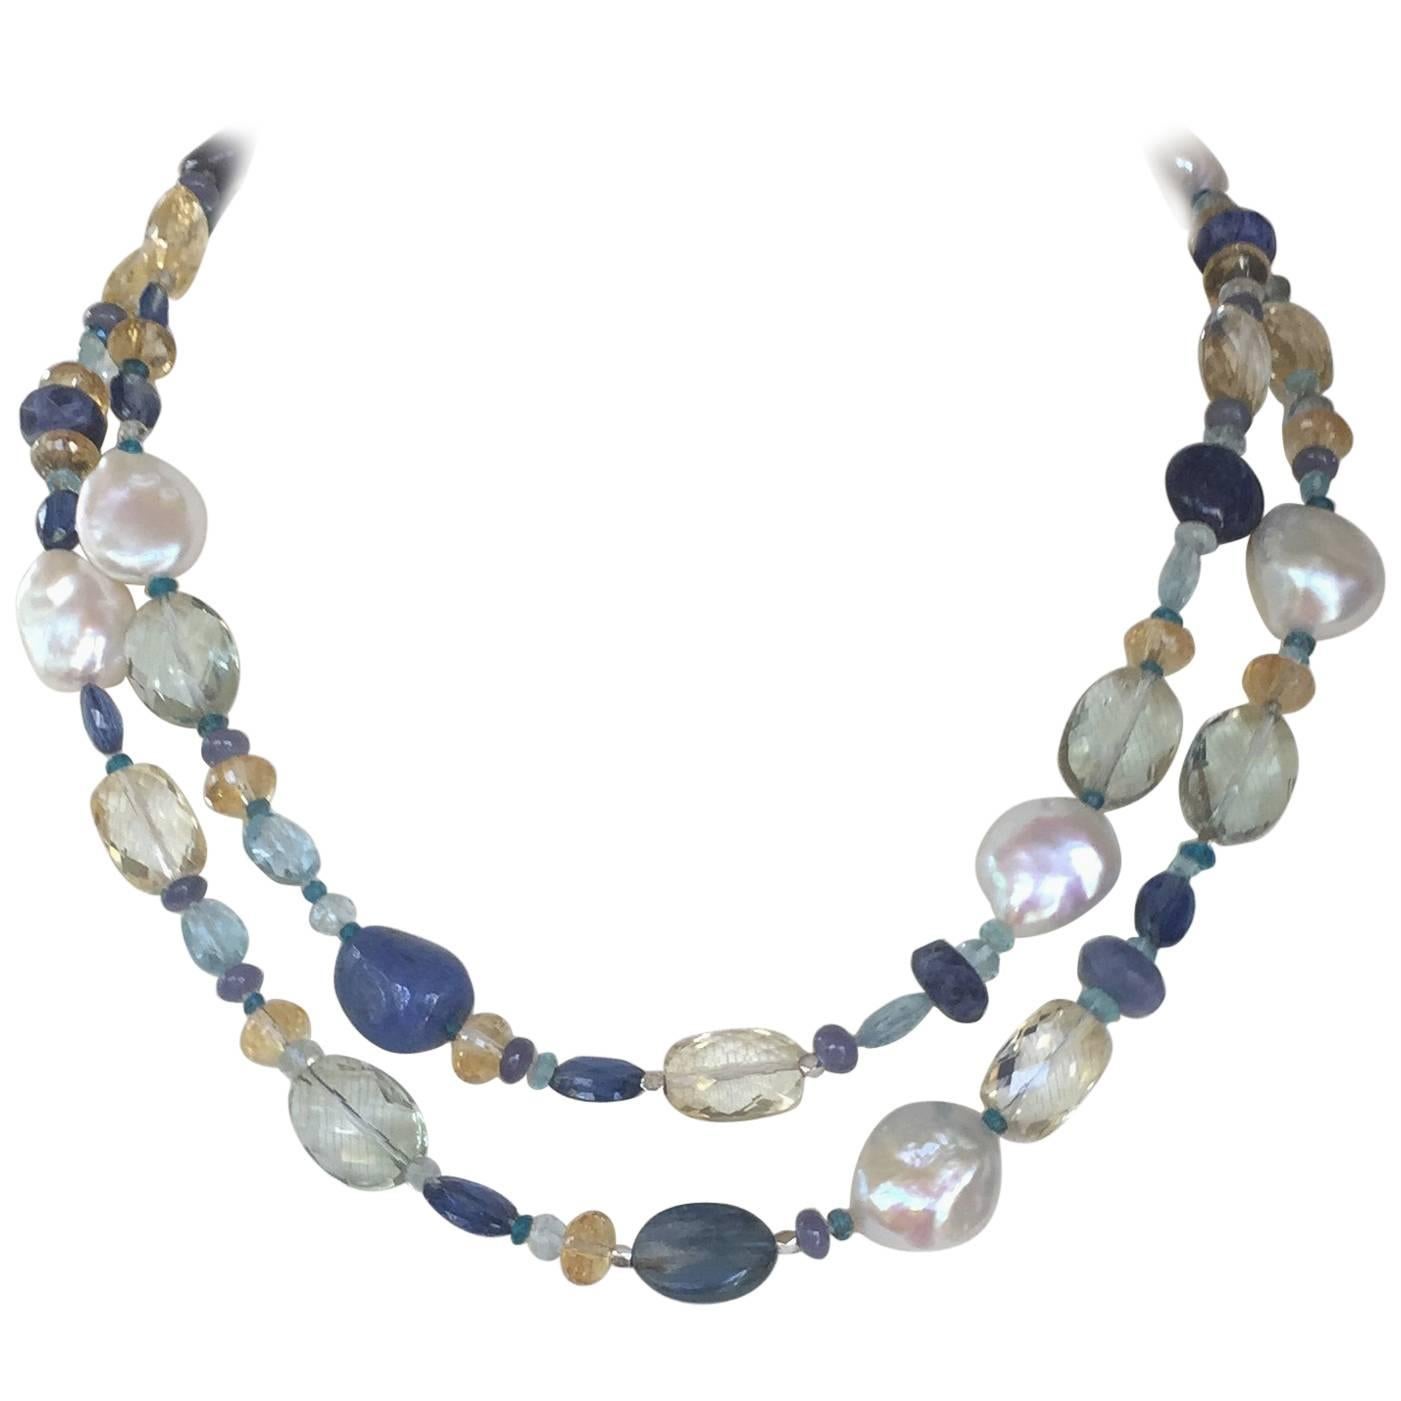 This pearl and semi-precious long necklace has a matching tassel and 14k white gold. The beautiful colors are composed of Kyanite, Iolite, Citrine, Tanzanite, Lapis Lazuli, Sapphire, Green Amethyst , Blue Agate, Aquamarine, Topaz, and Laboradite. 